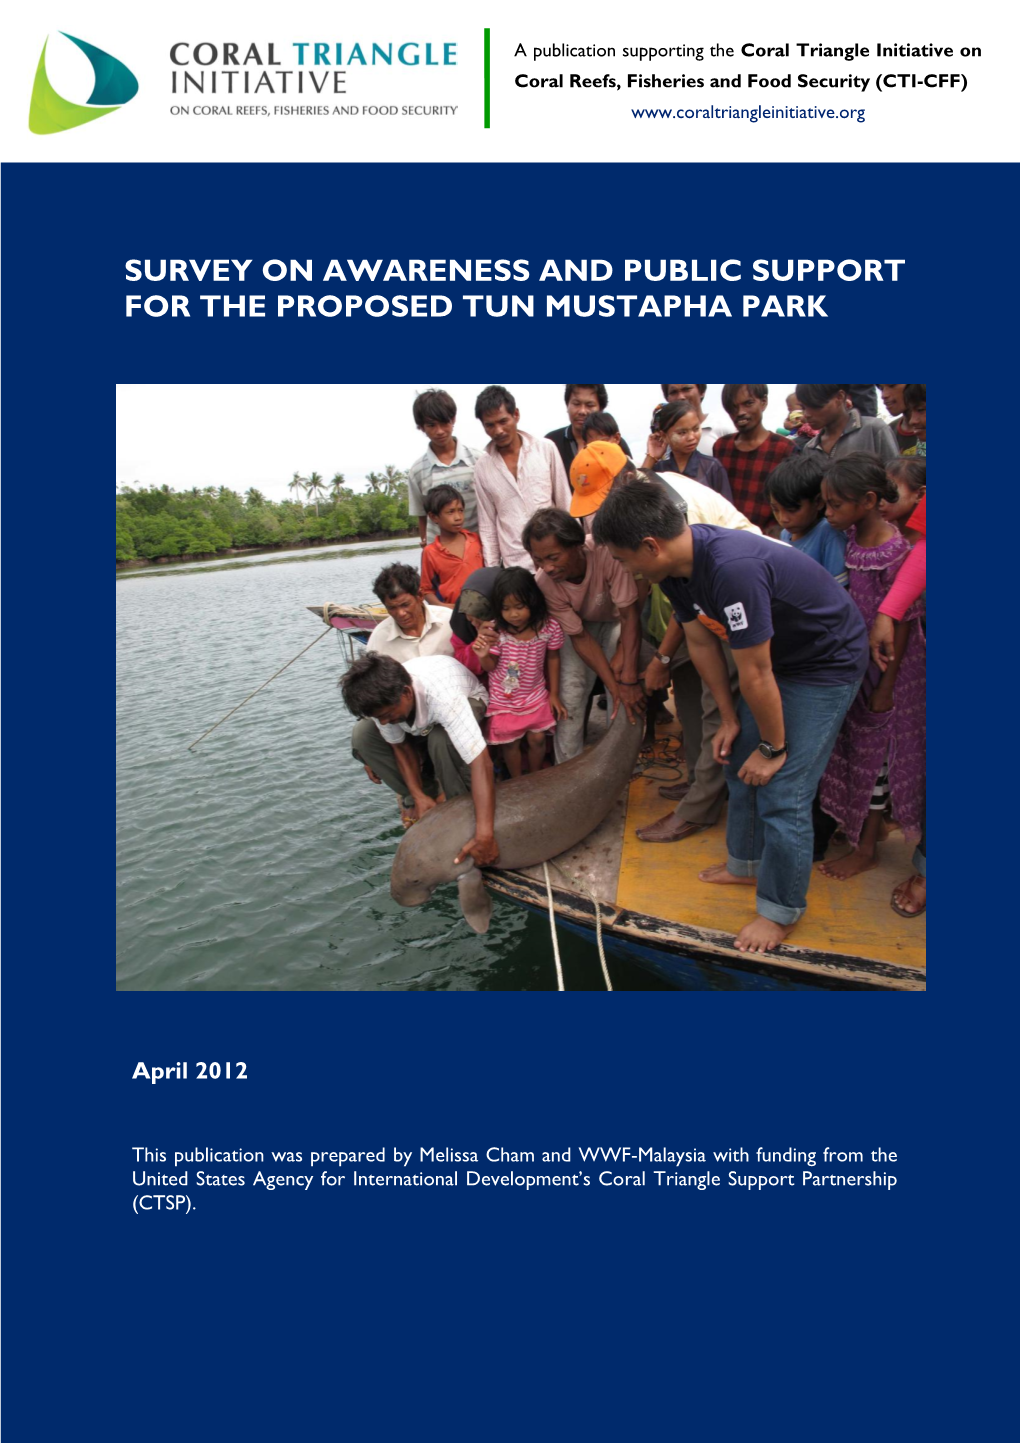 Survey on Awareness and Public Support for the Proposed Tun Mustapha Park